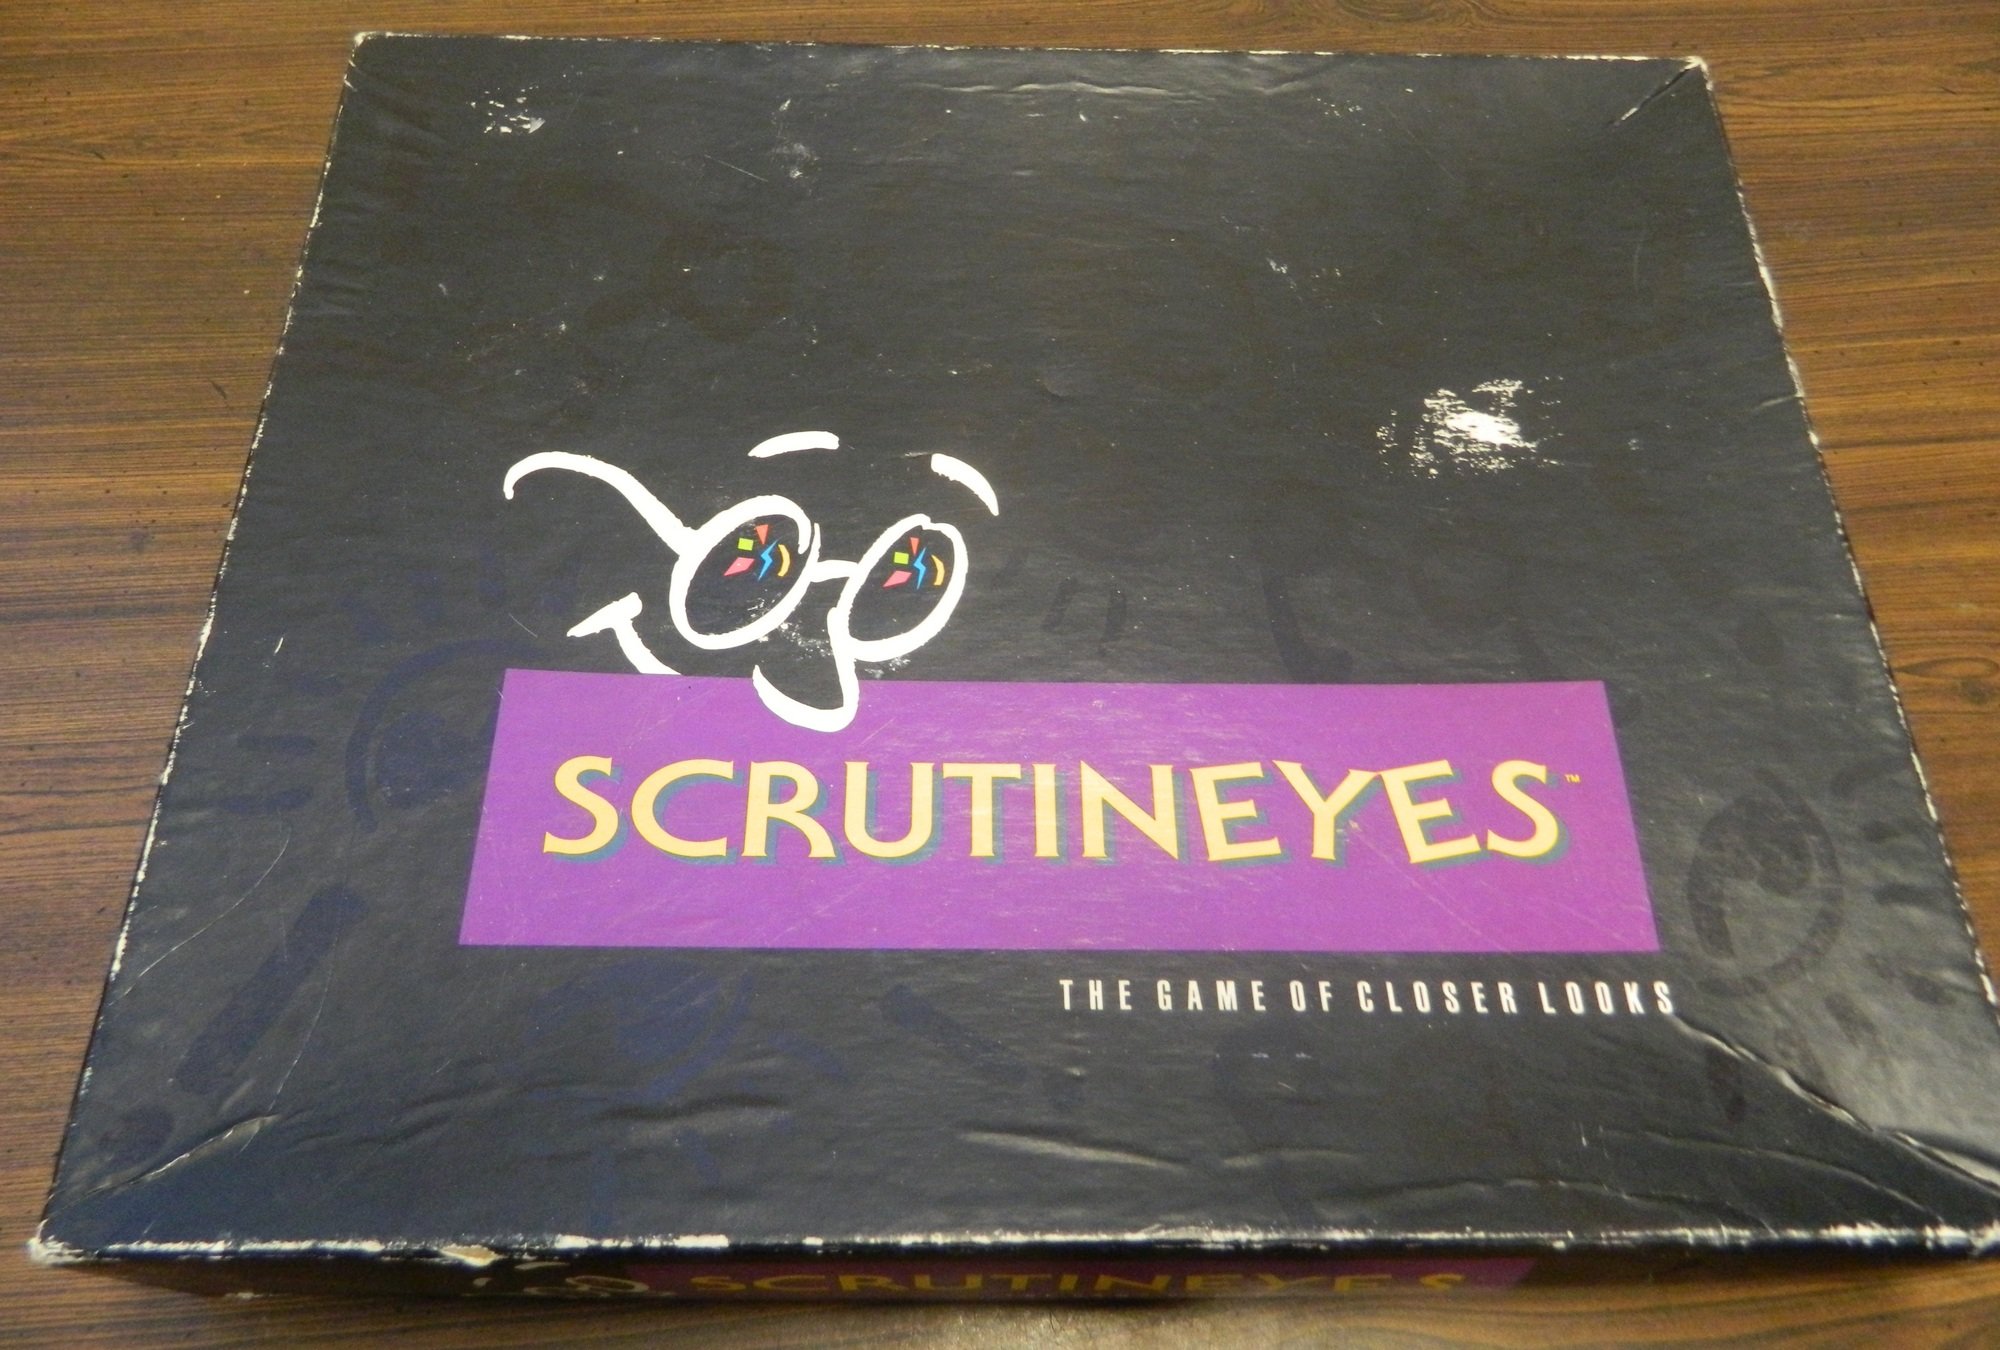 Scrutineyes Board Game Review and Rules